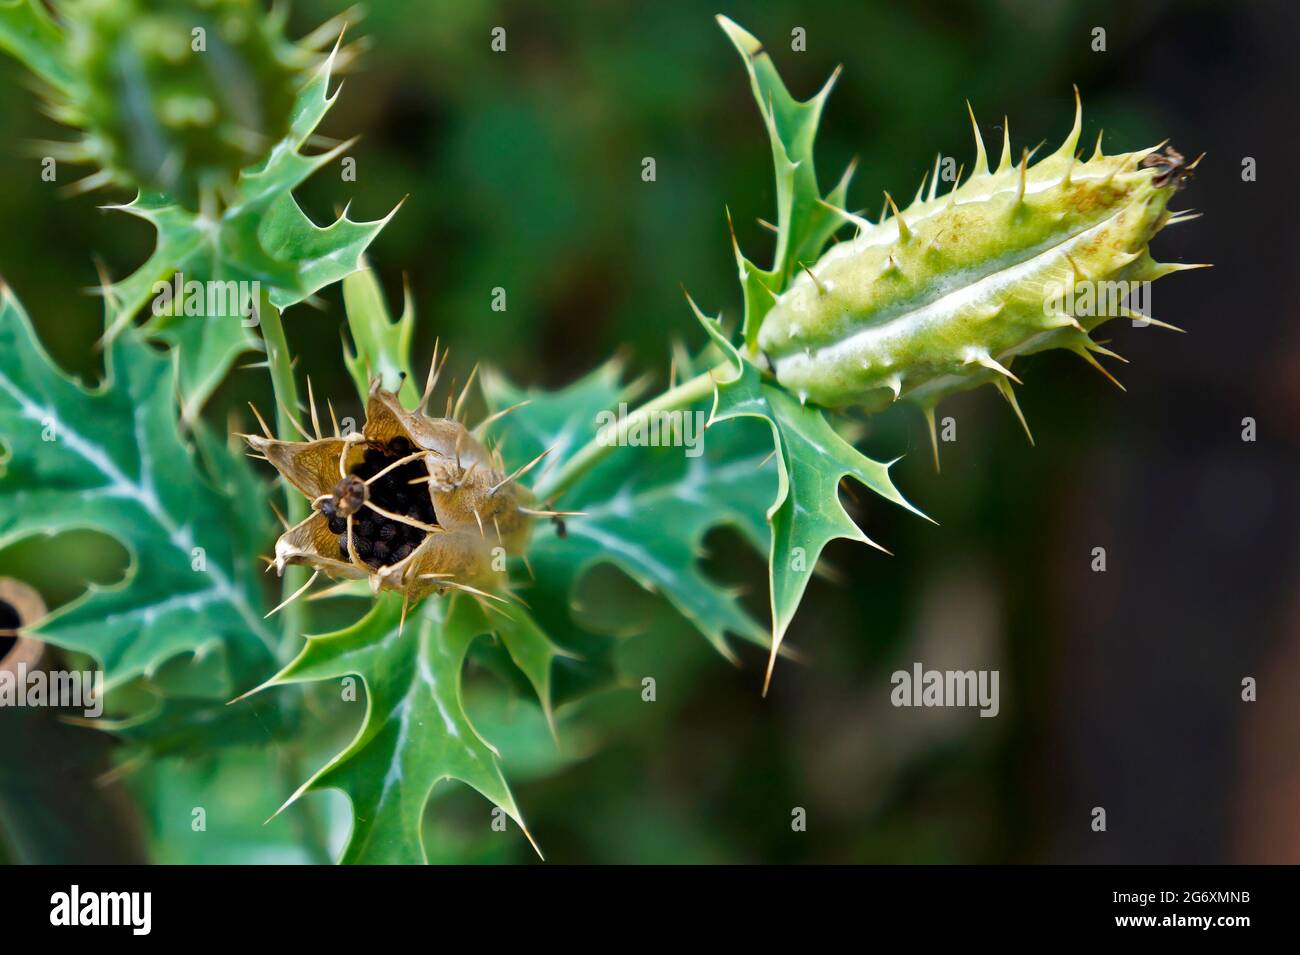 Medicinal plant, Mexican prickly poppy fruit and seeds (Argemone mexicana) Stock Photo